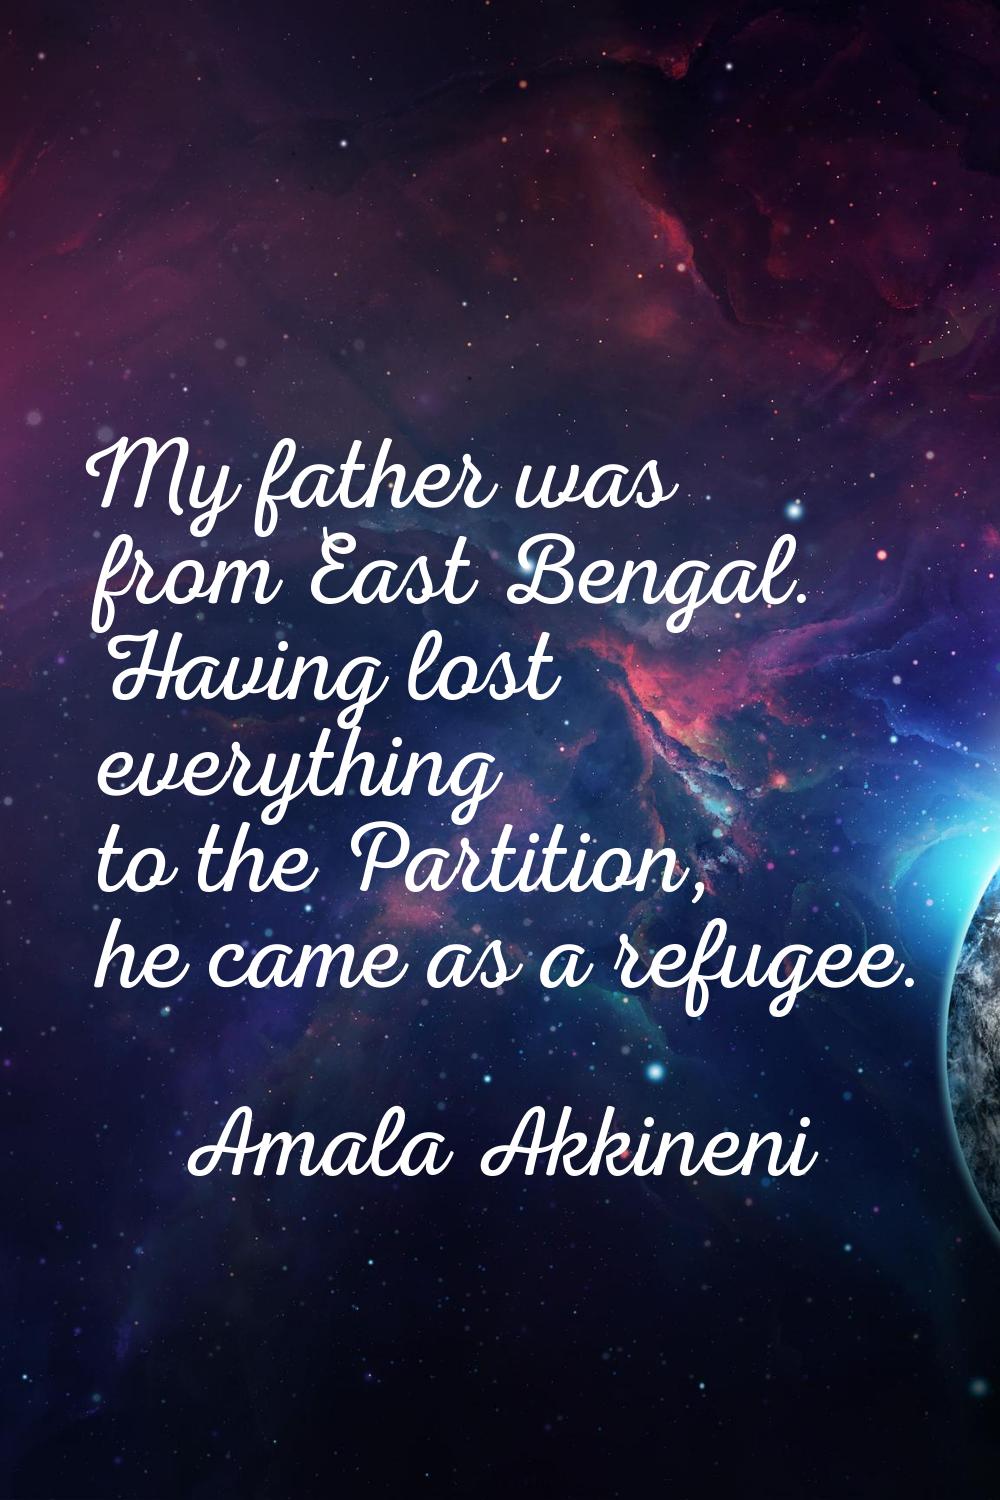 My father was from East Bengal. Having lost everything to the Partition, he came as a refugee.